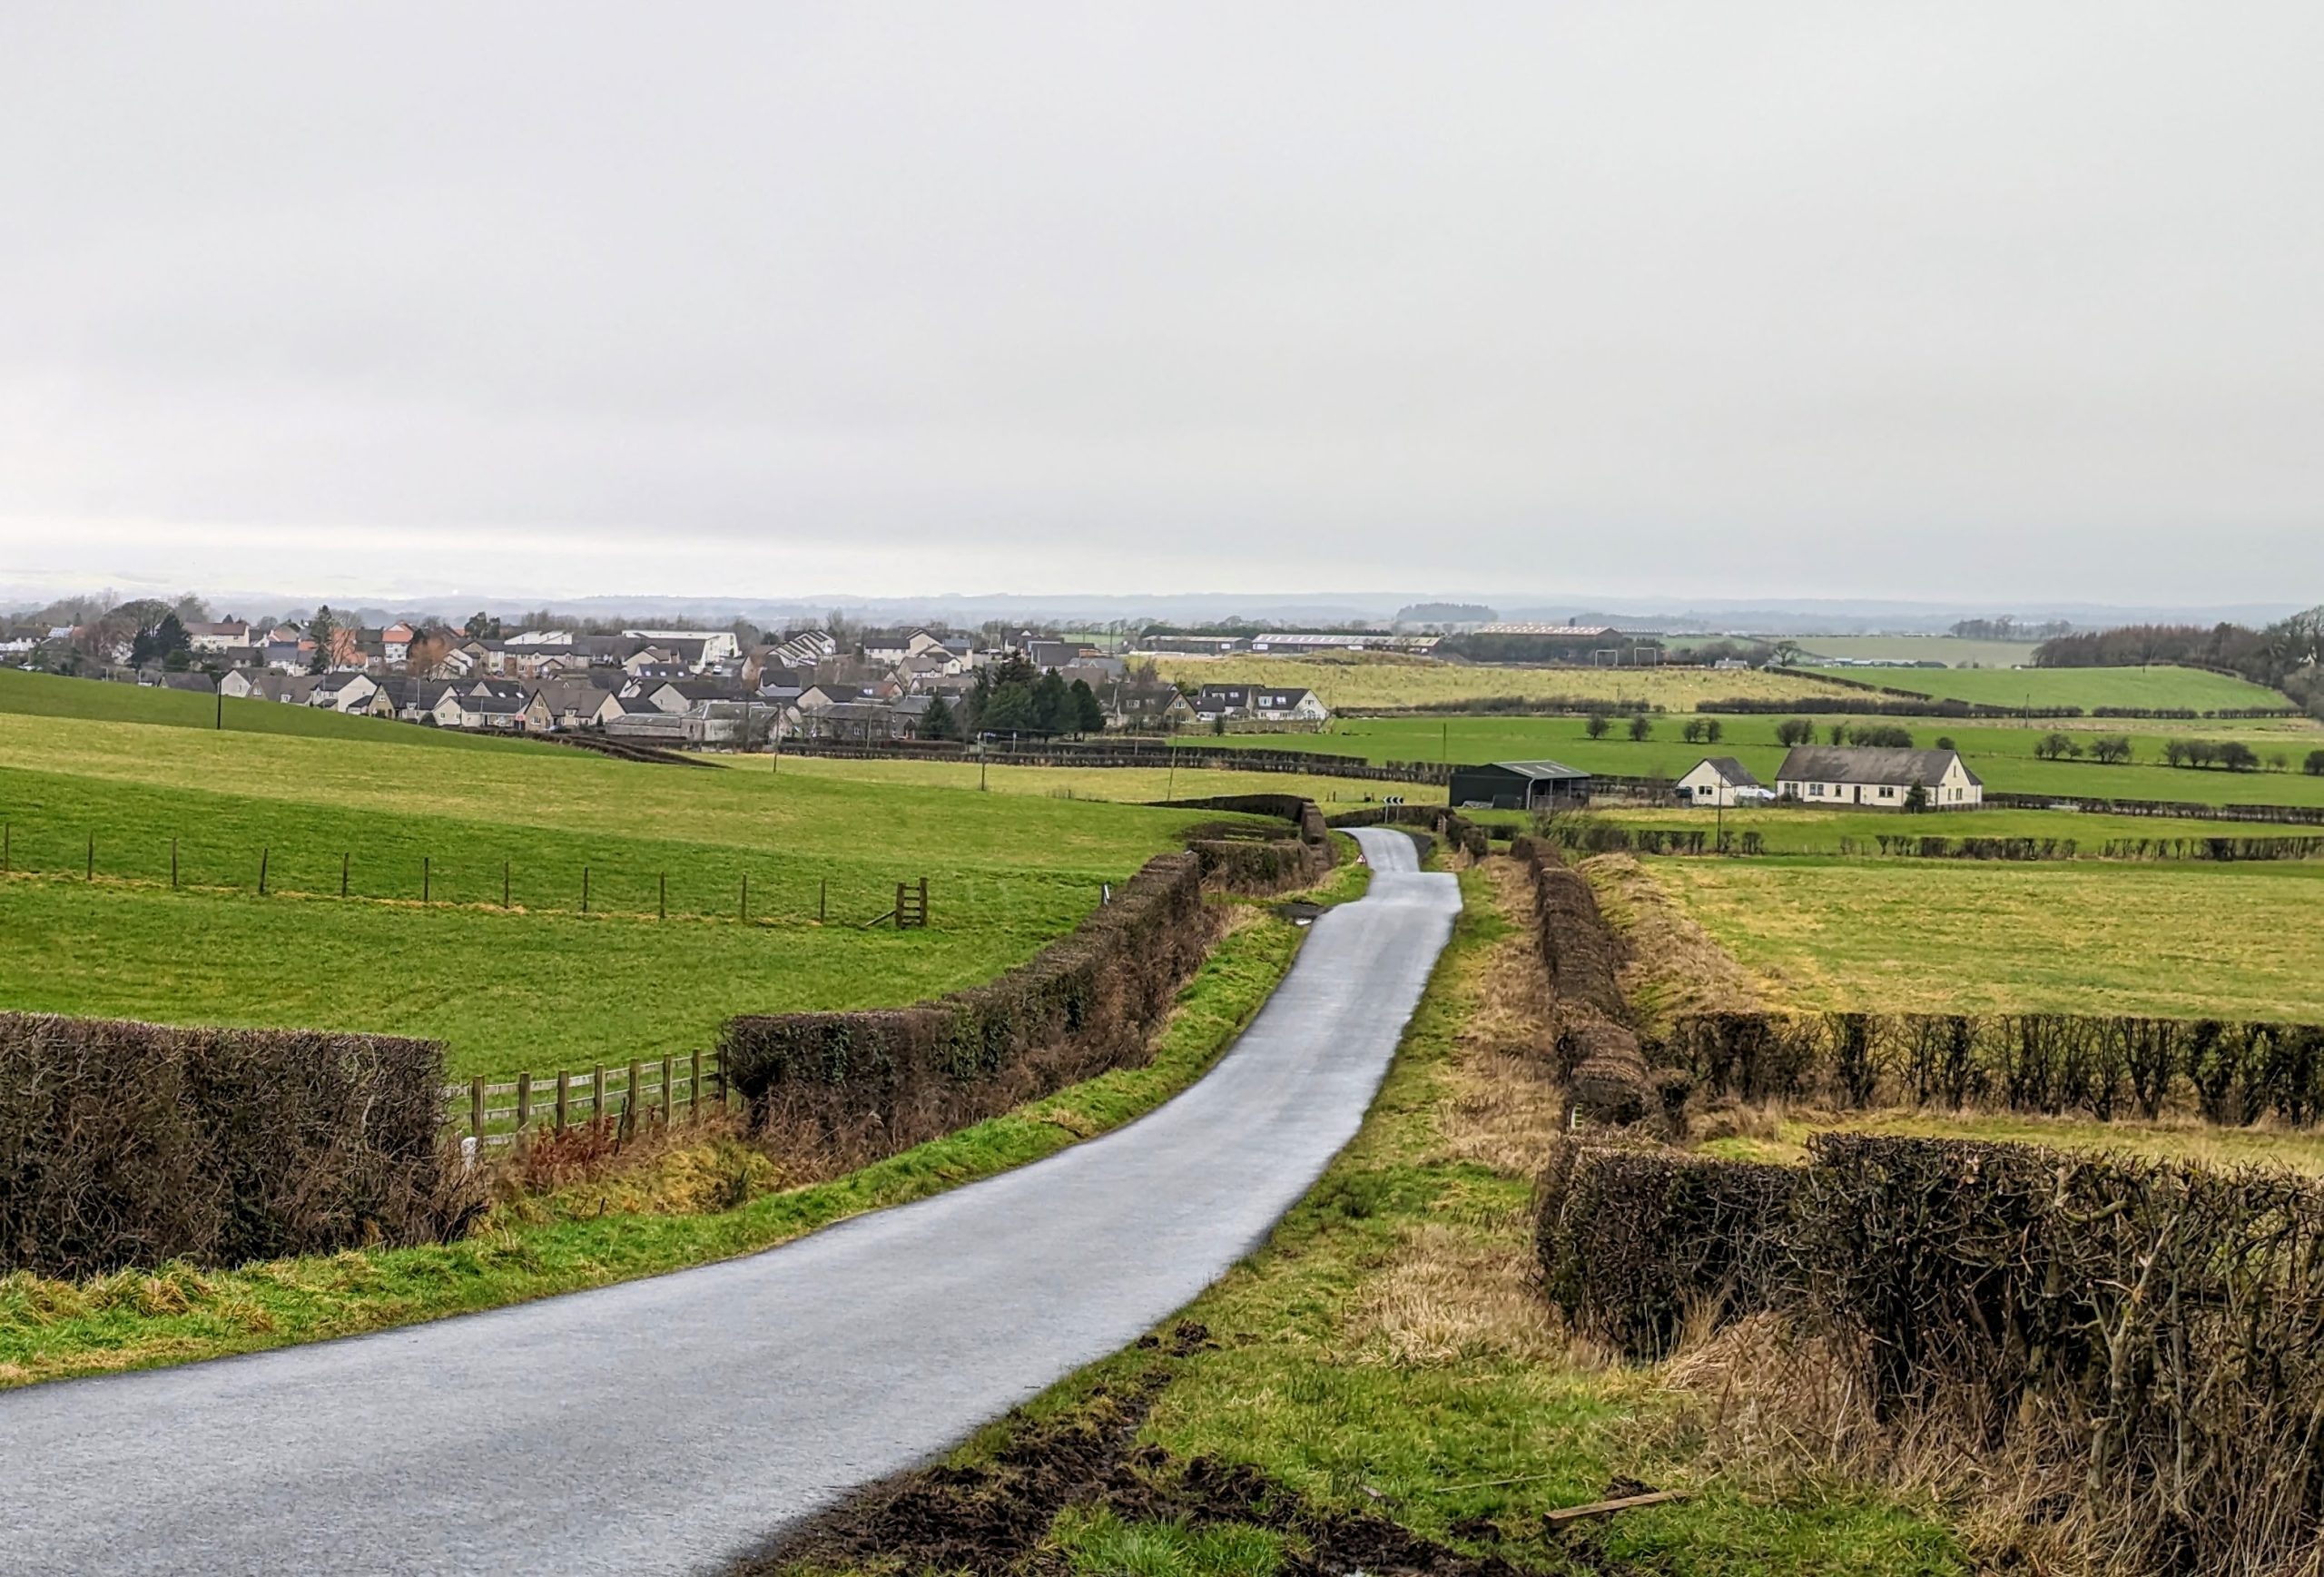 Single track road leading to Dundonald village in the distance